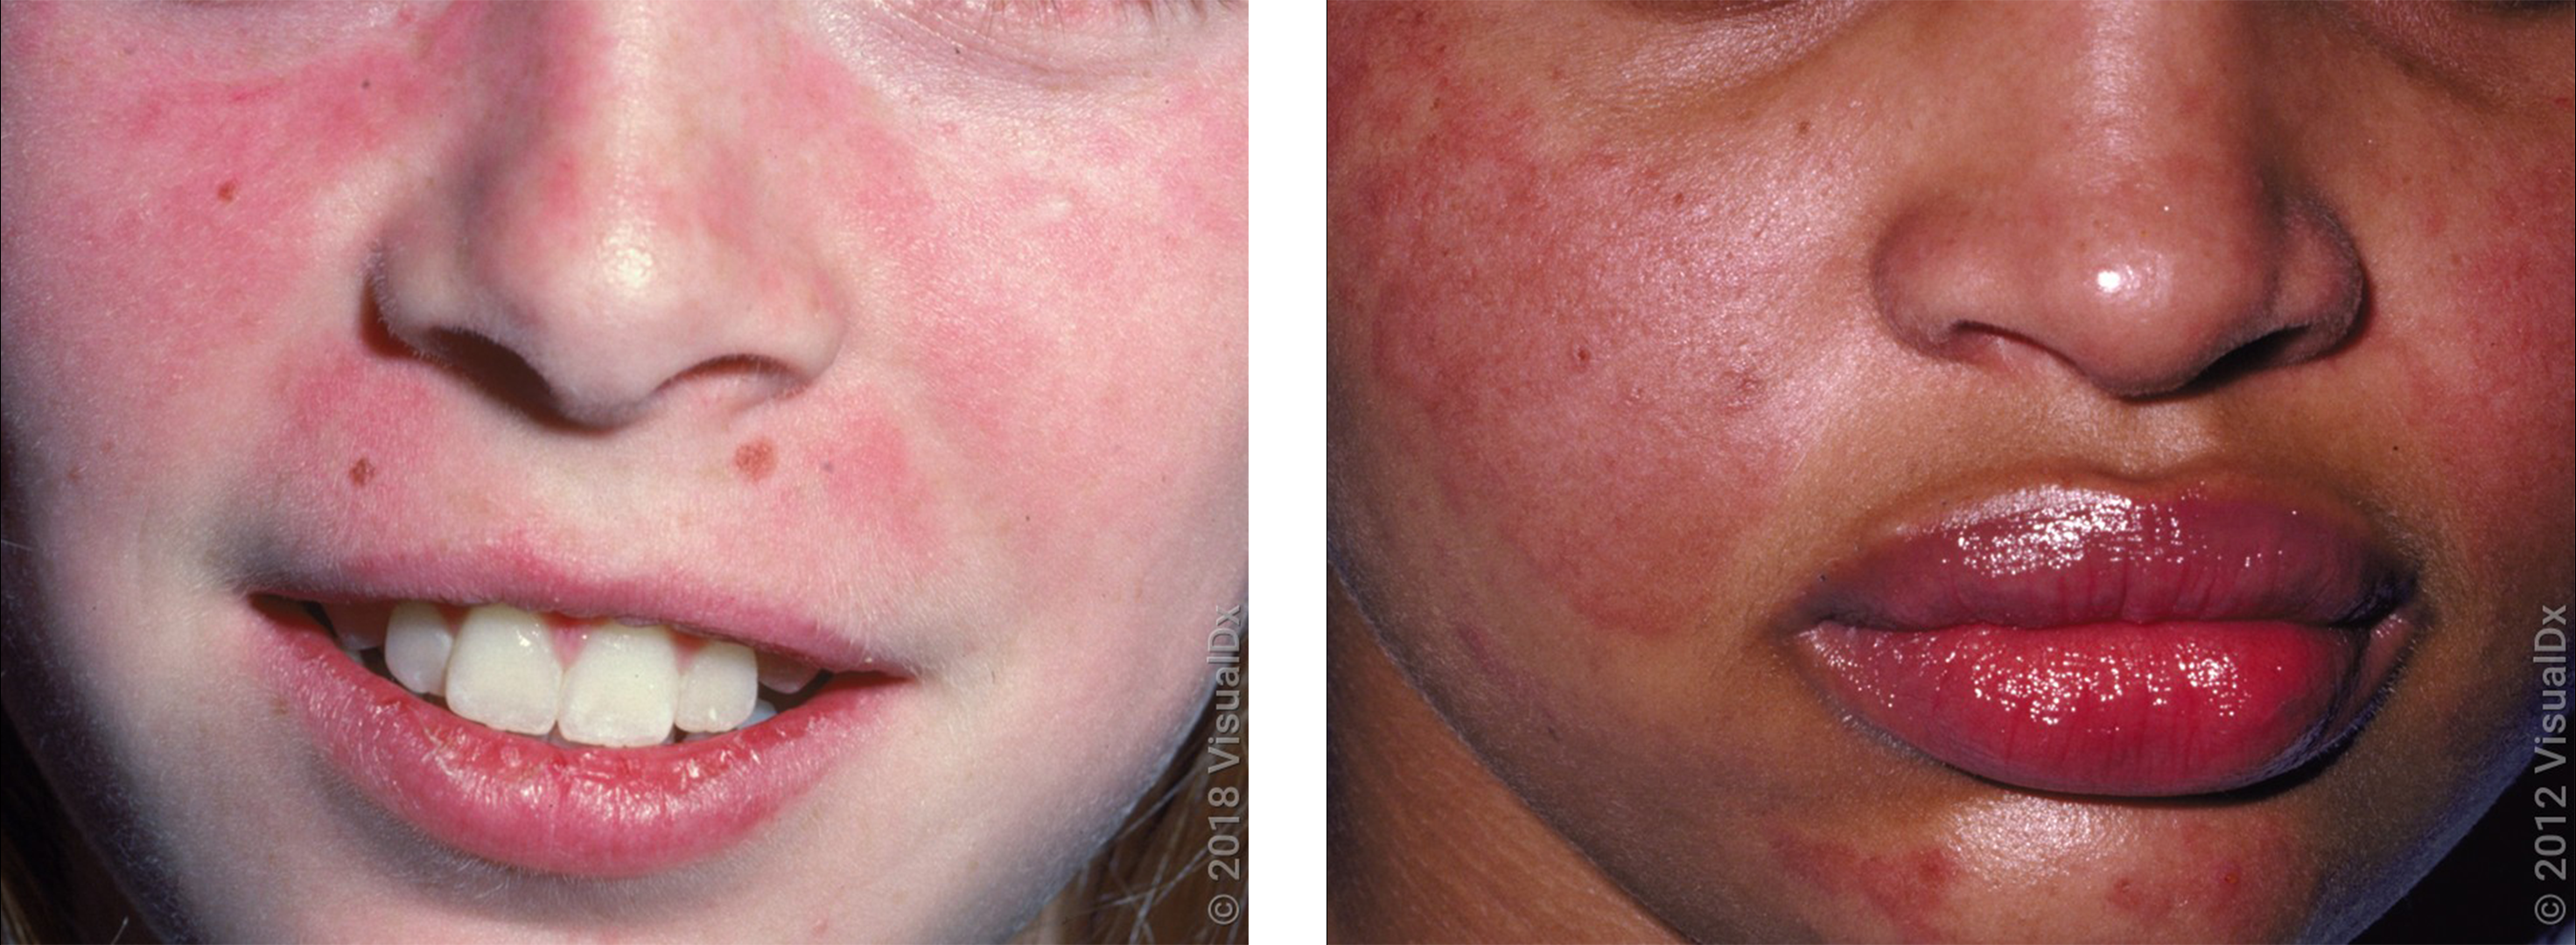 Left: A pink rash on the nose, cheeks, and upper lip in lupus. Right: A red faint  purple rash on the nose and cheeks in lupus.